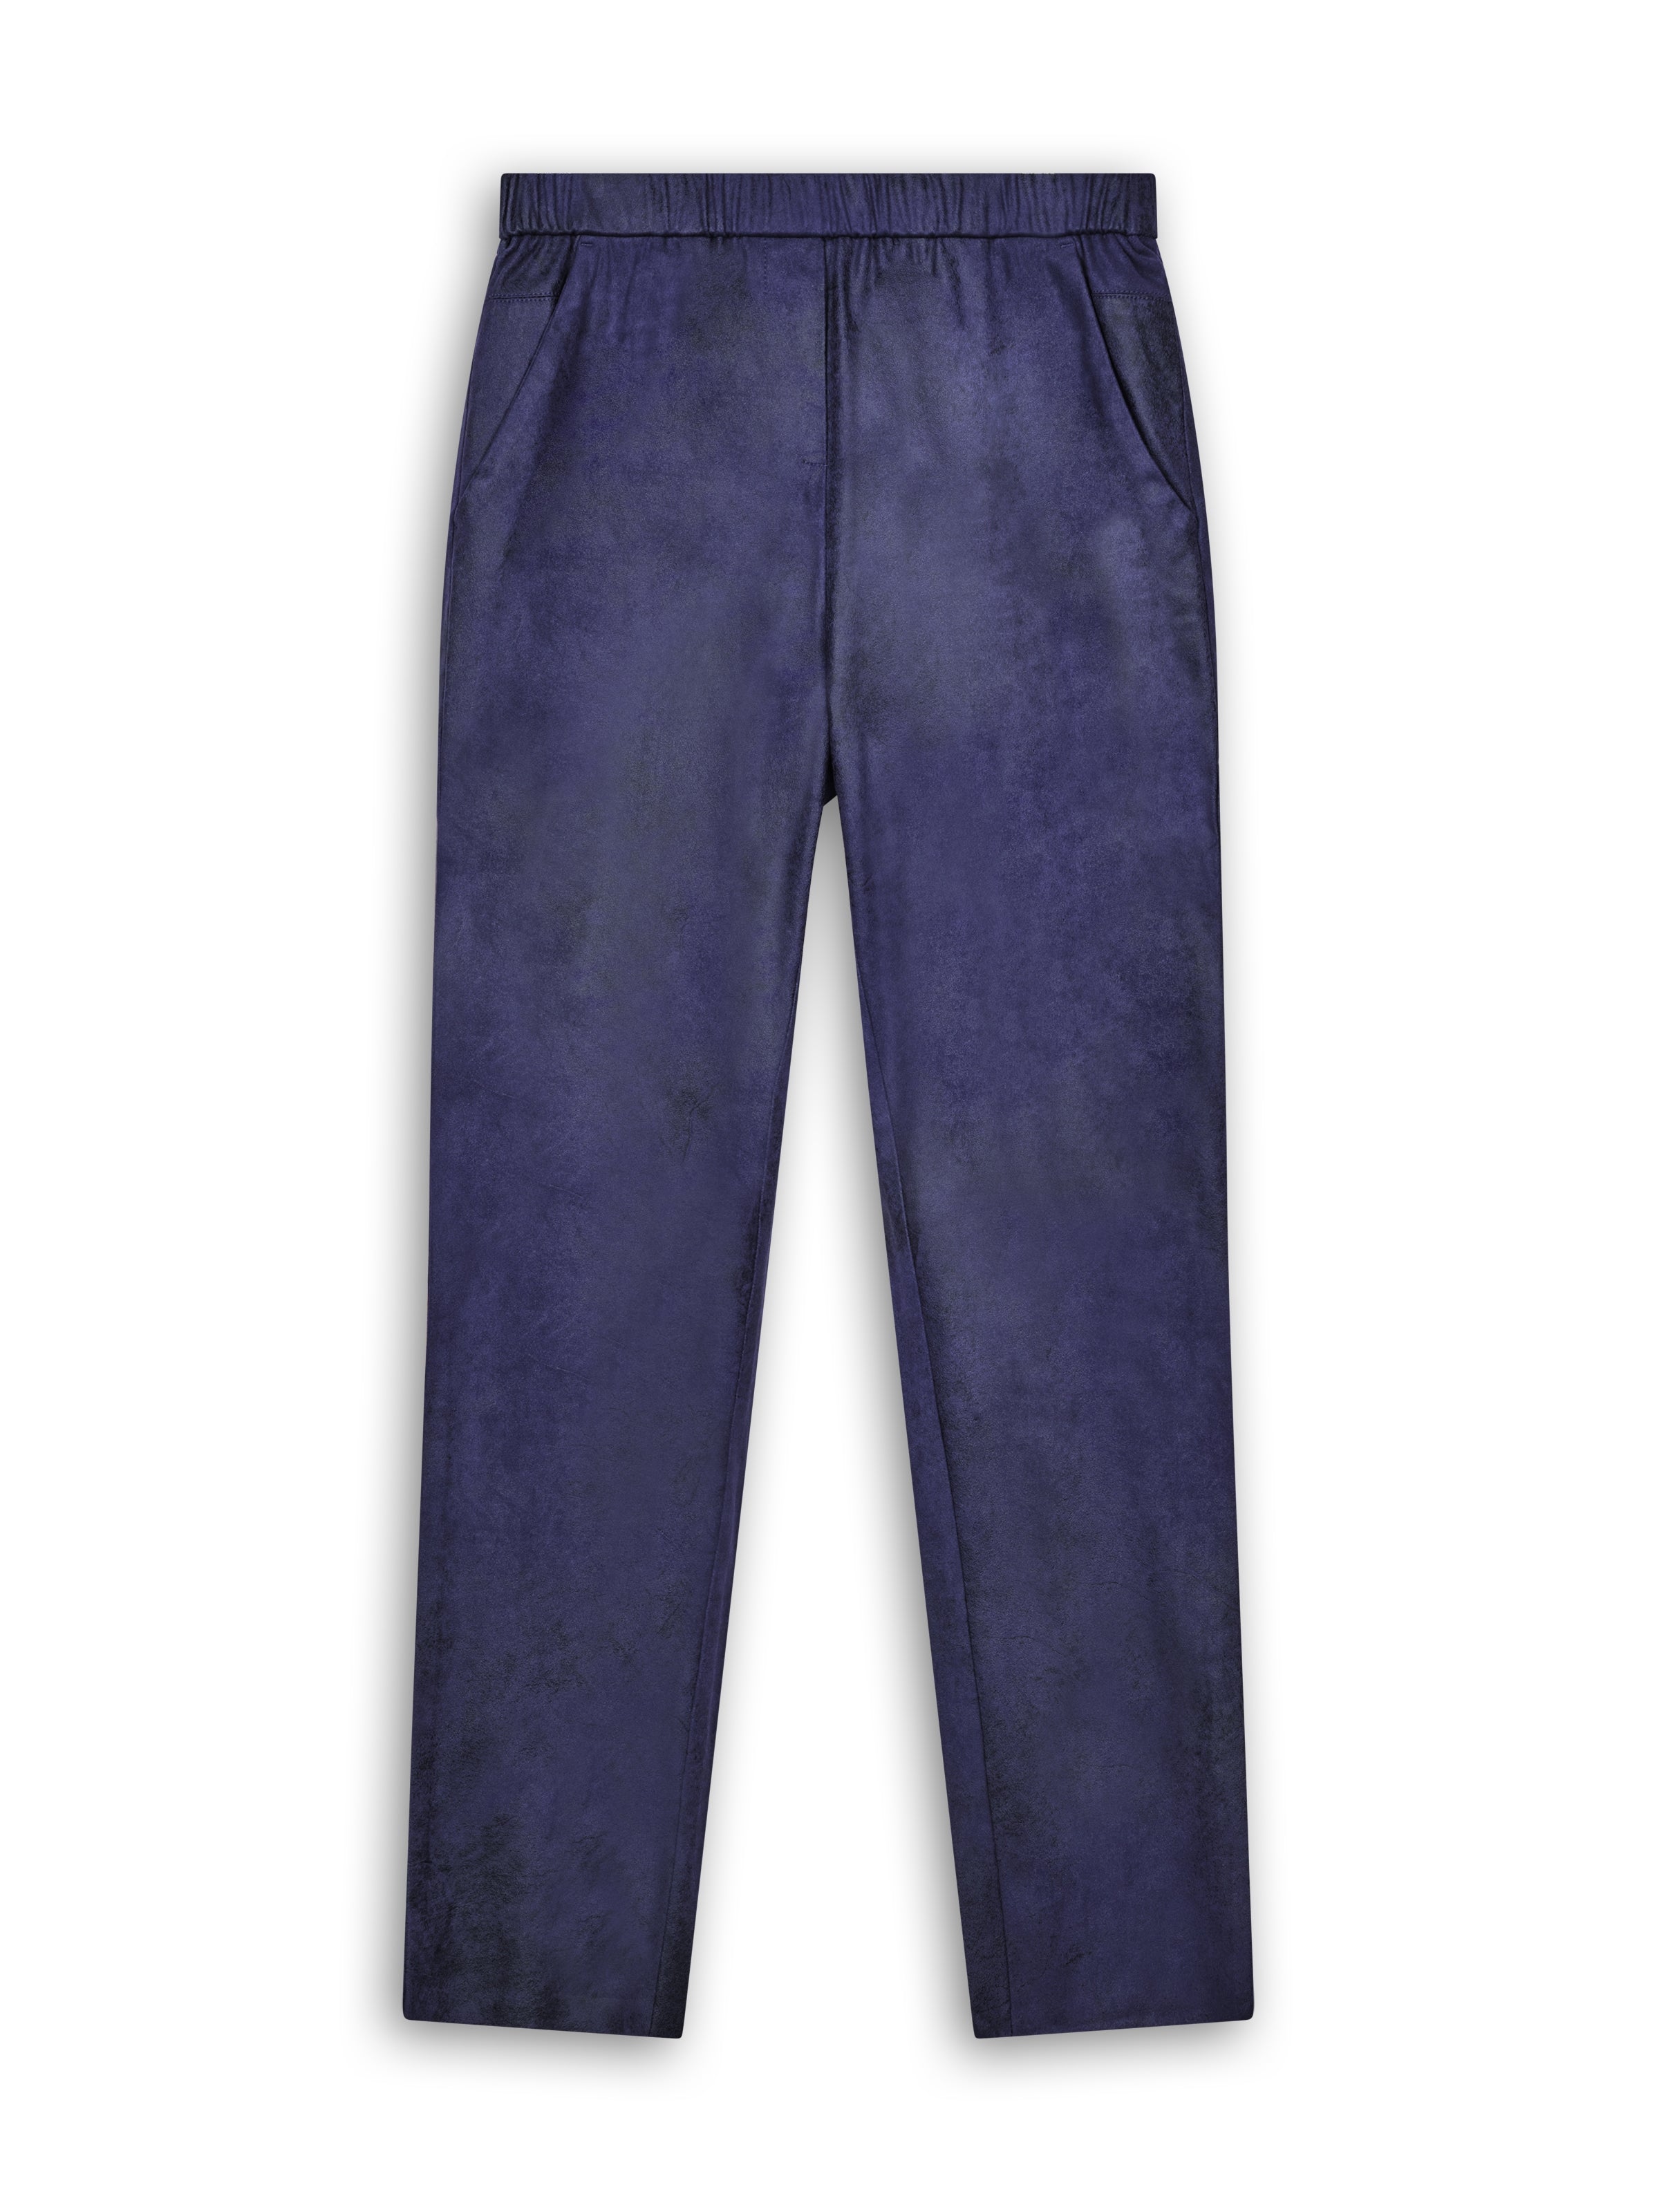 Suede look trousers